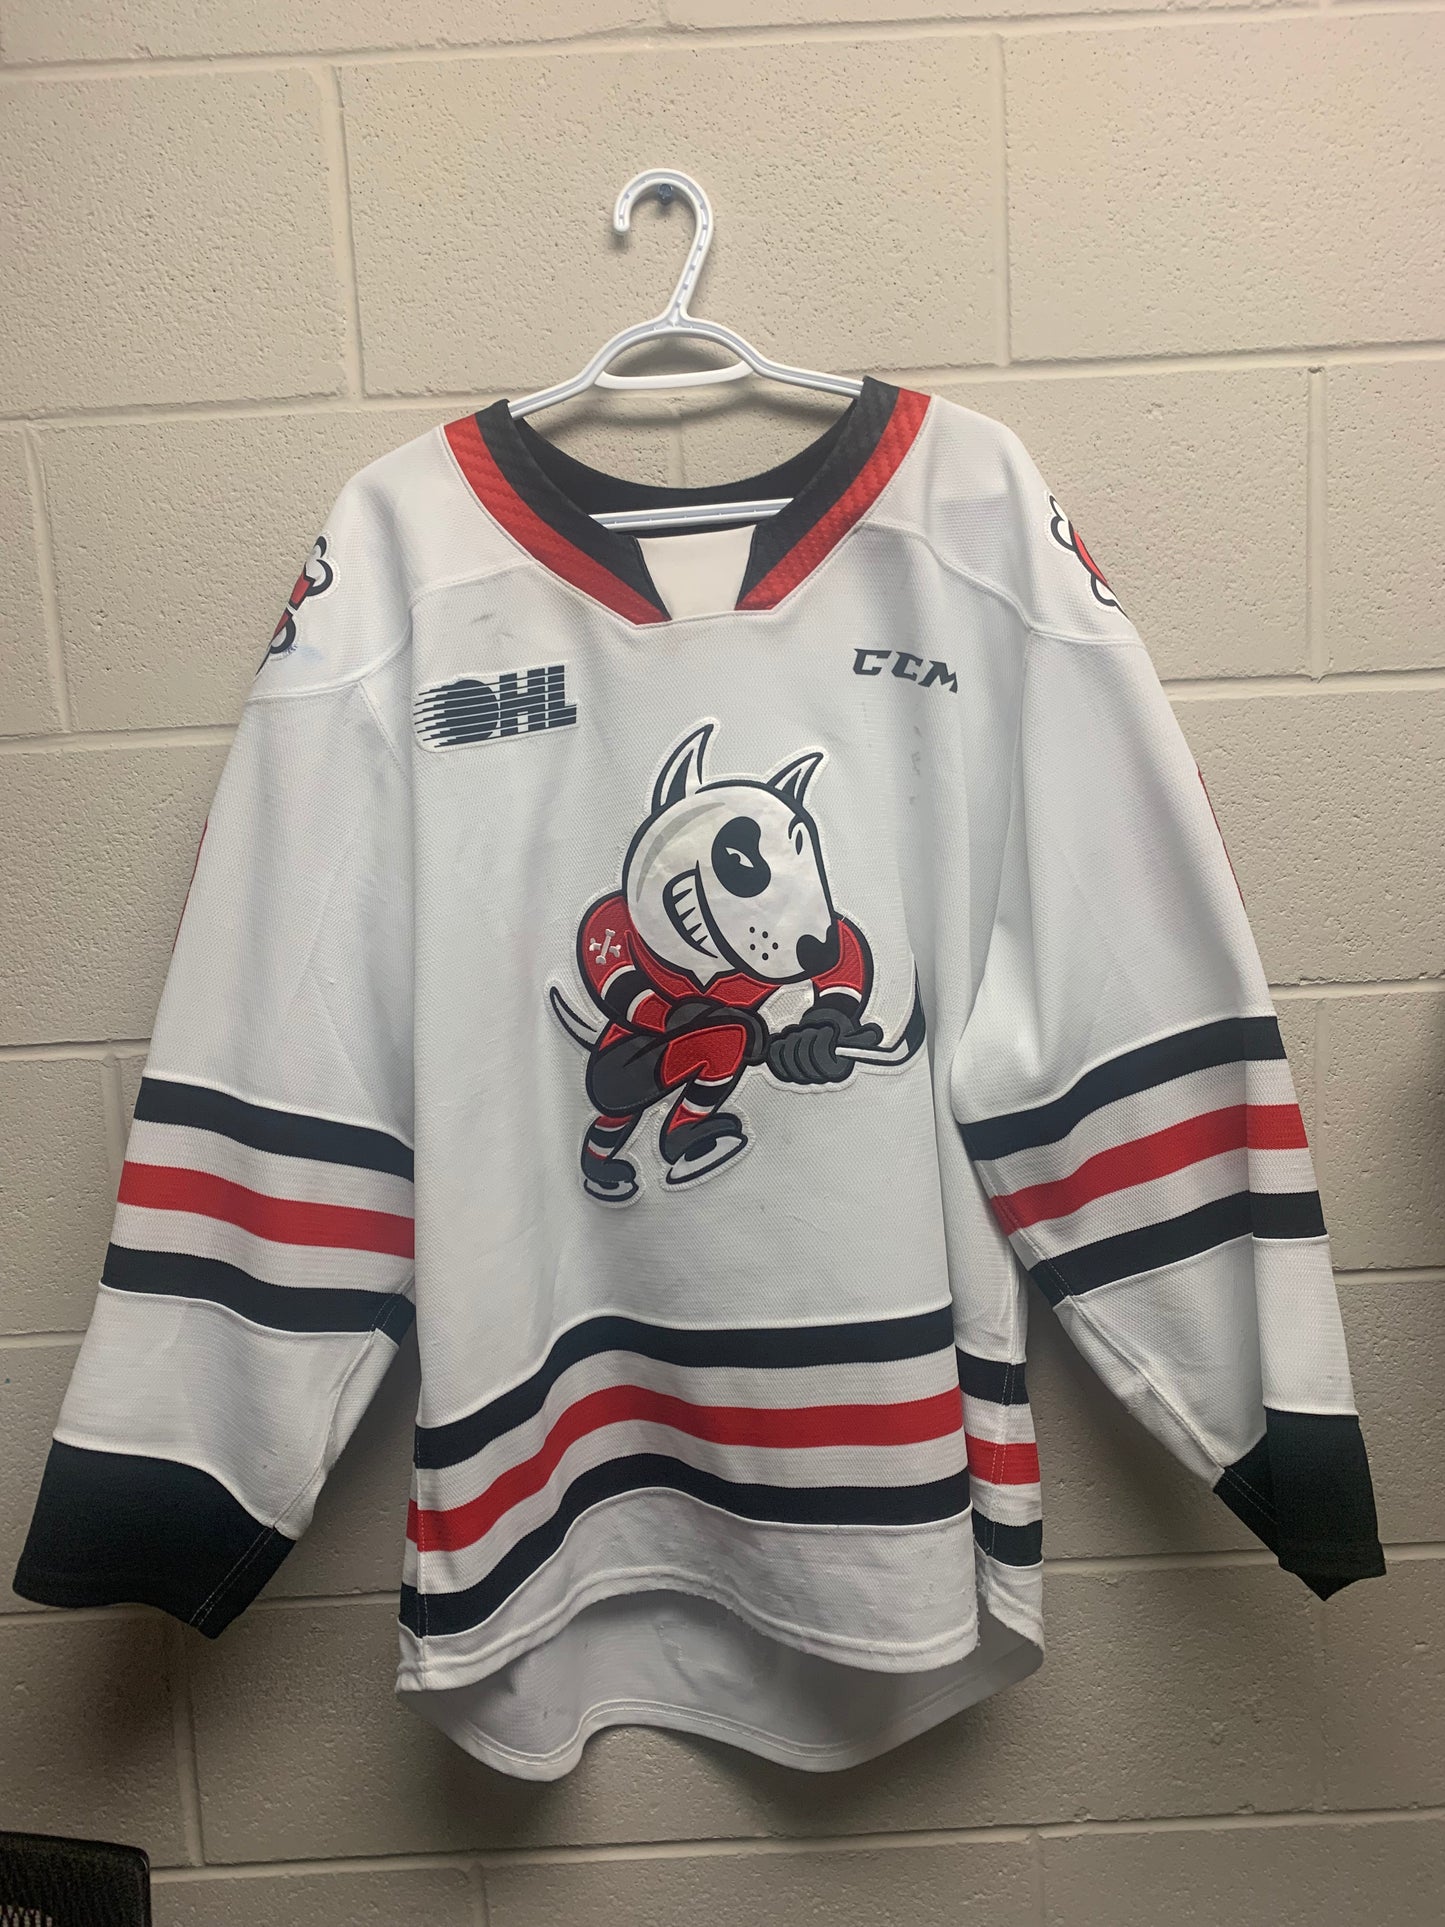 Game Issued Jersey